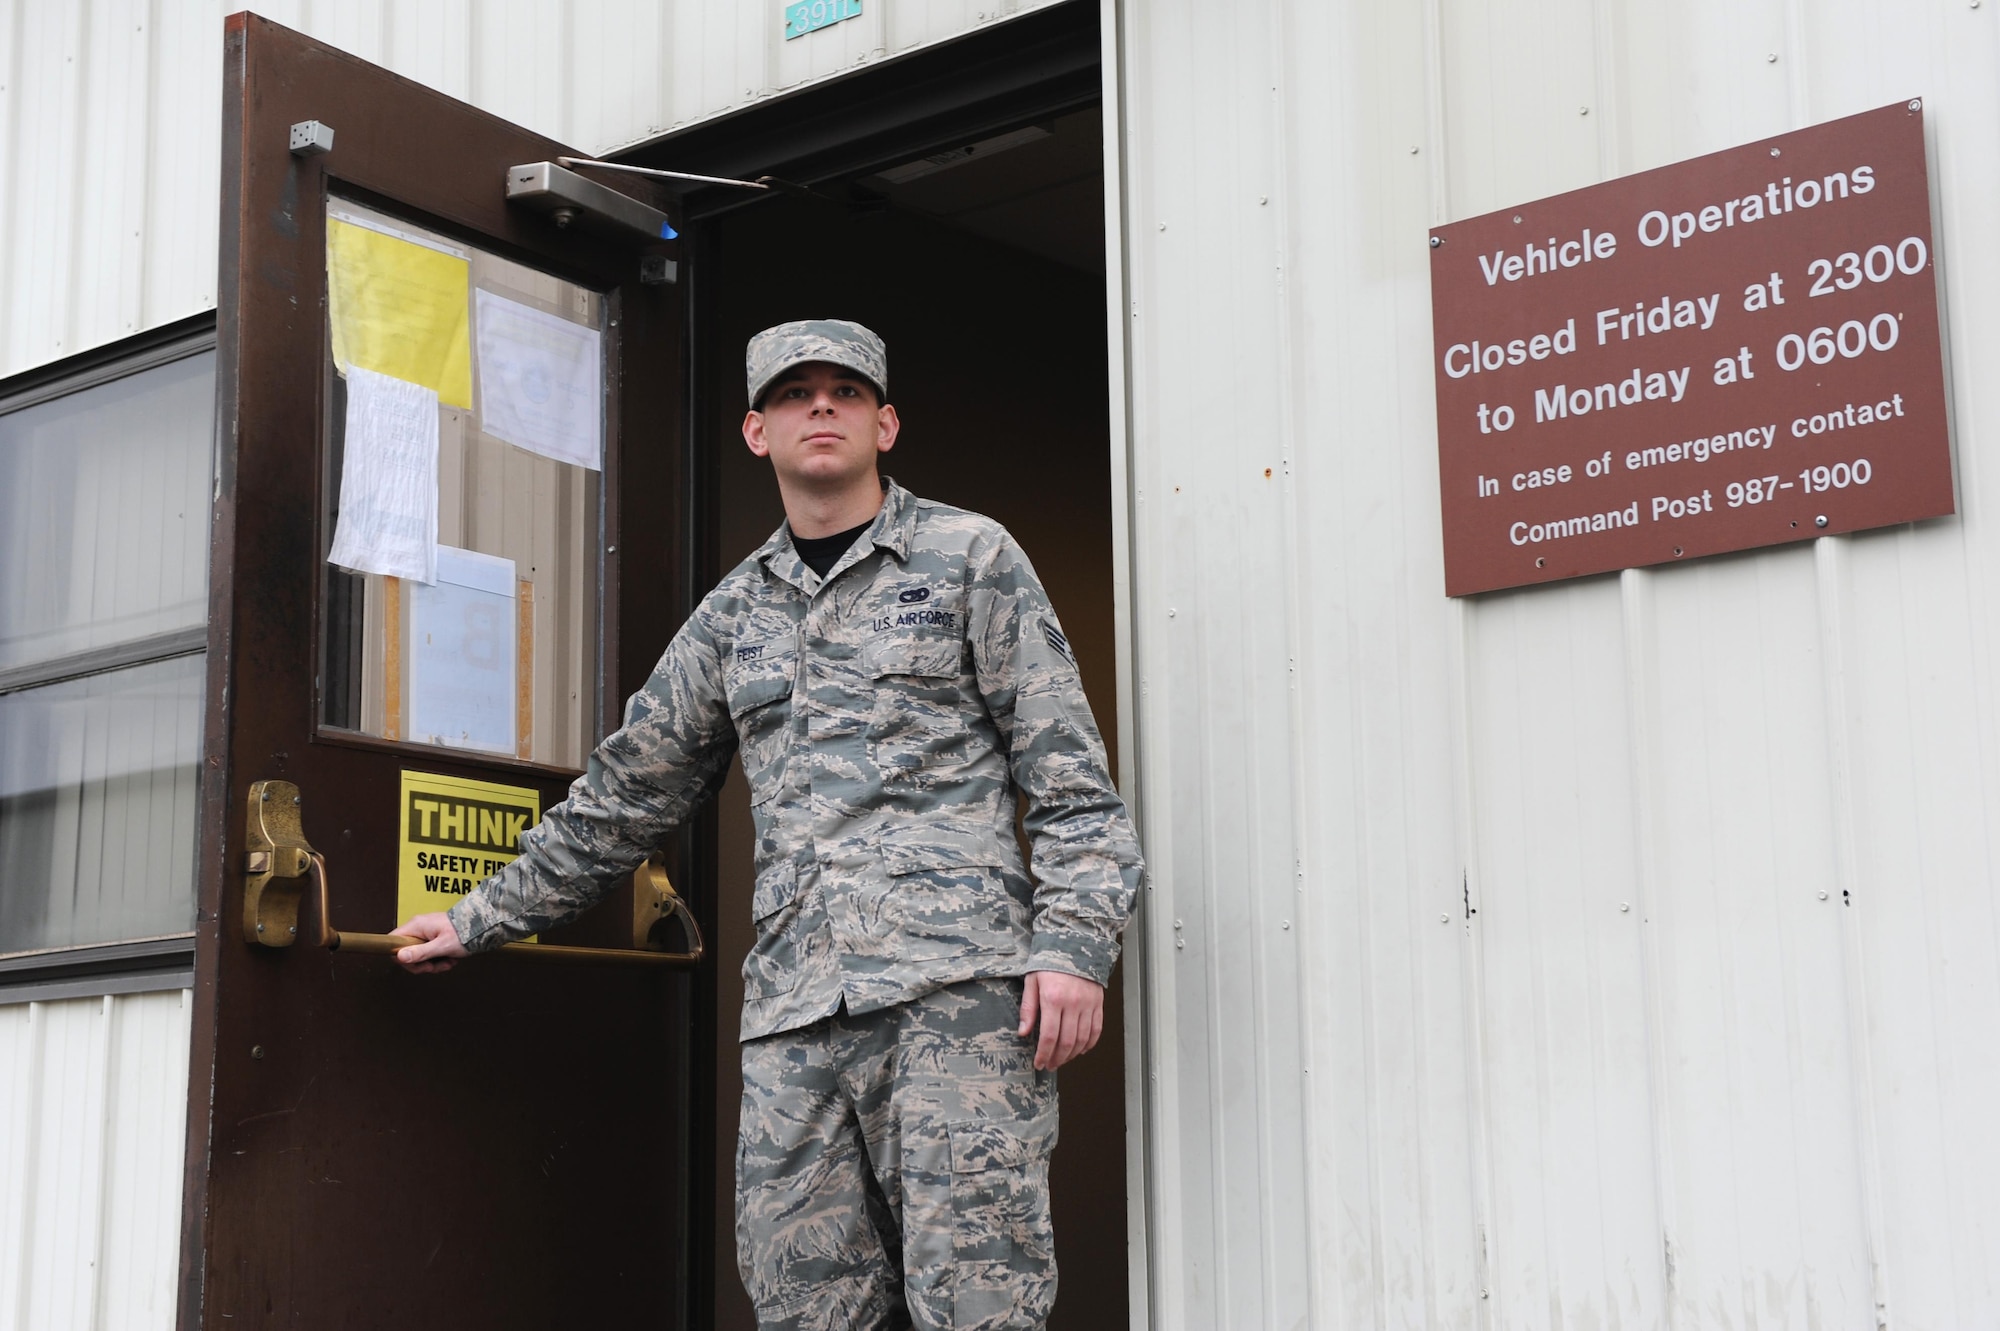 U.S. Air Force Senior Airman Anthony Feist, 19th Logistics Readiness Squadron Vehicle Operations shop operator dispatcher, departs the shop for a vehicle inspection Jan. 12, 2017, at Little Rock Air Force Base, Ark. The Vehicle Operations shop caters to the ground transportation needs of the base by providing 61 vehicles, such as sedans, vans, tow trucks and other vehicles. (U.S. Air Force photo by Airman 1st Class Grace Nichols)